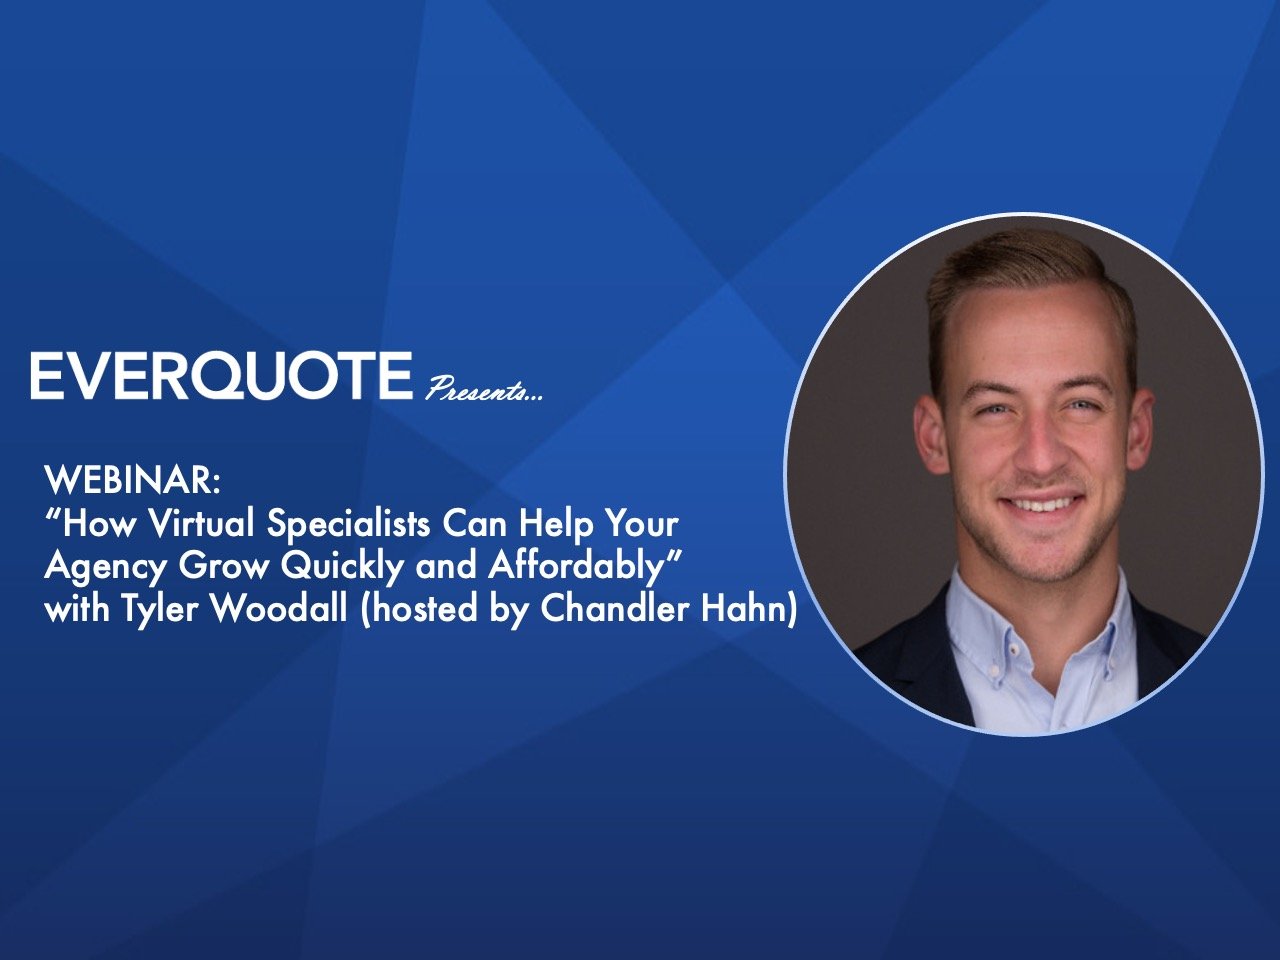 How Virtual Specialists Can Help Your Agency Grow Quickly and Affordably with Tyler Woodall